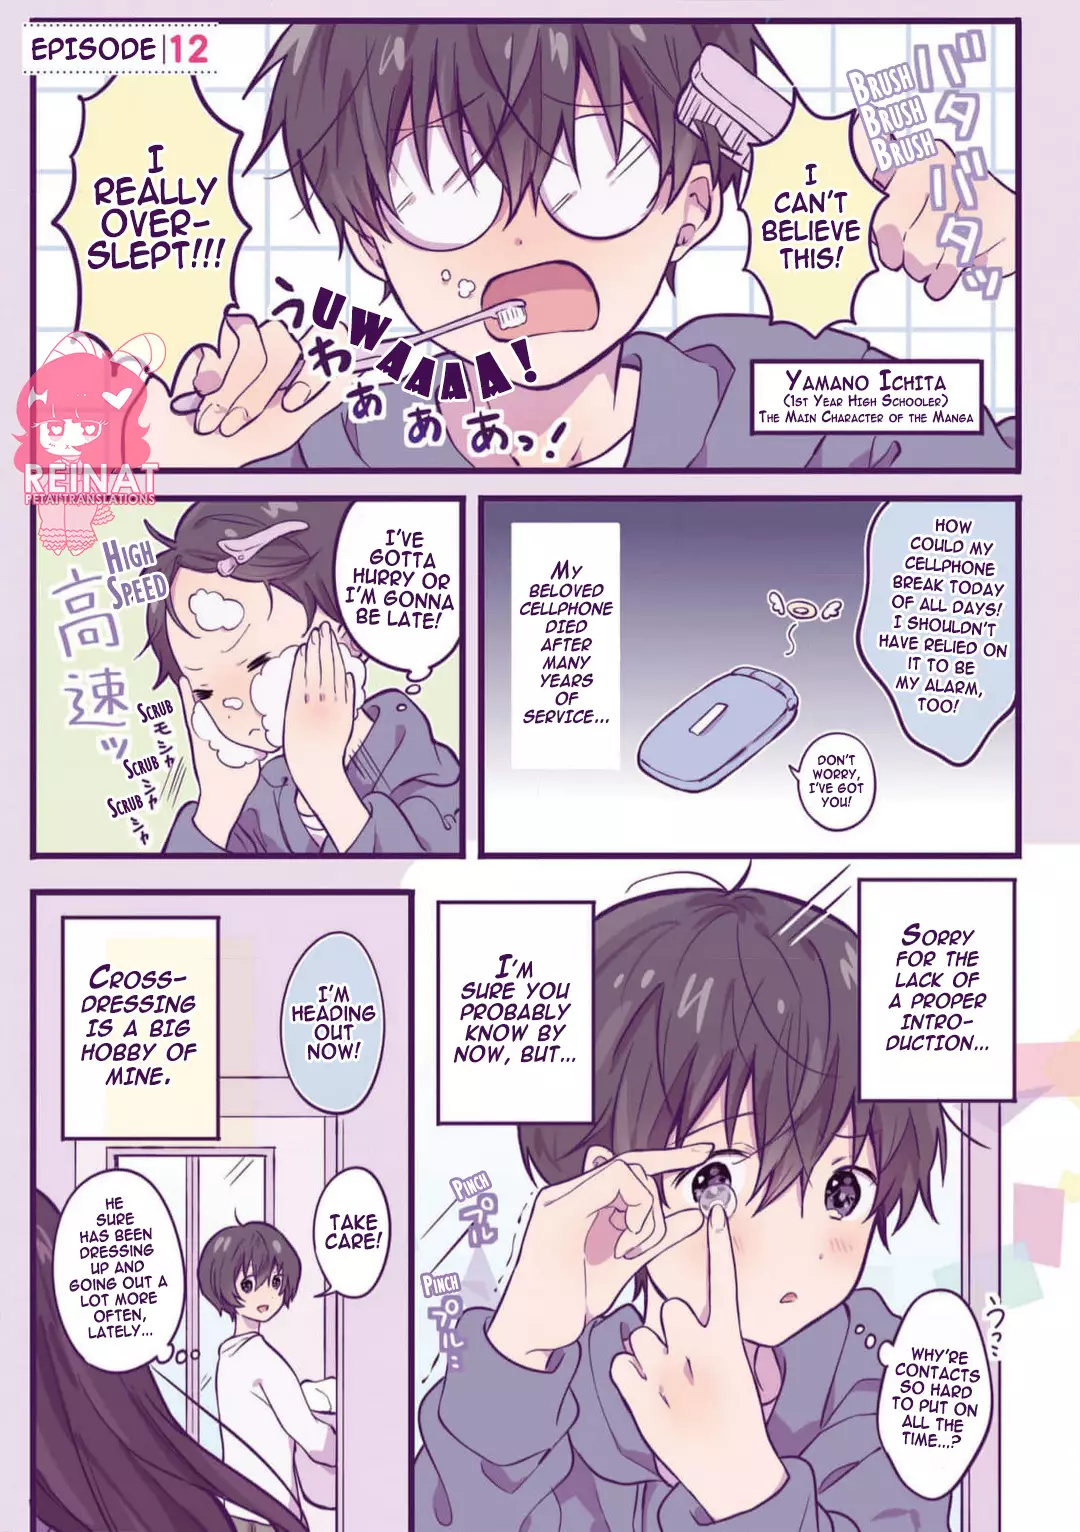 A First-Year High School Boy Whose Hobby Is Cross-Dressing - 12 page 1-8a9f8638